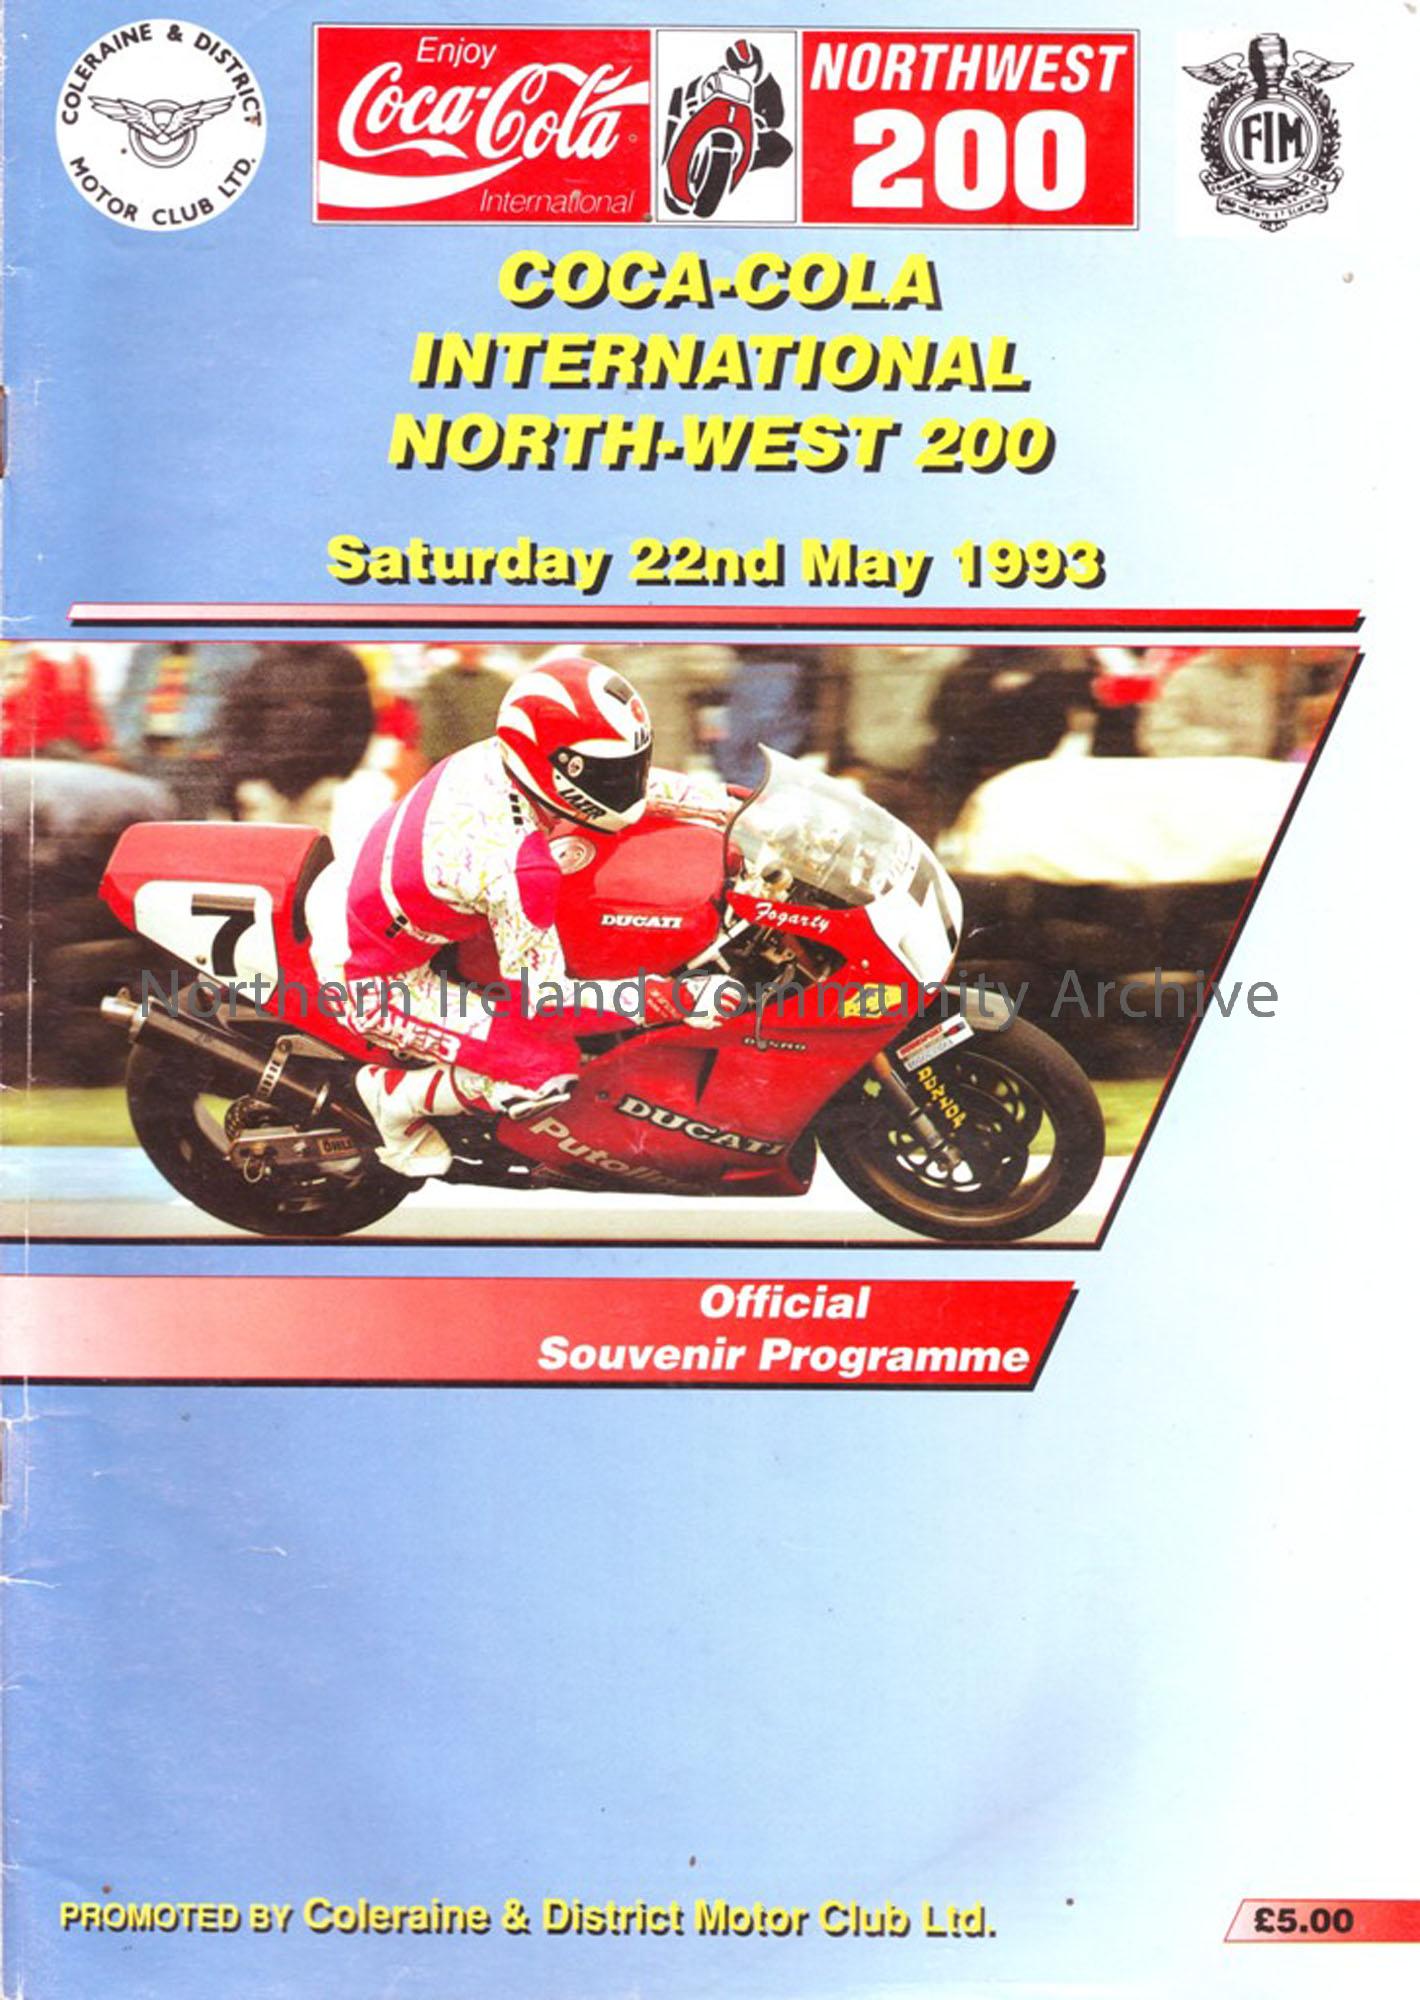 Official Souvenir Programme of the North West 200, 1993. Includes lists of Entrants in each class and lap score charts.